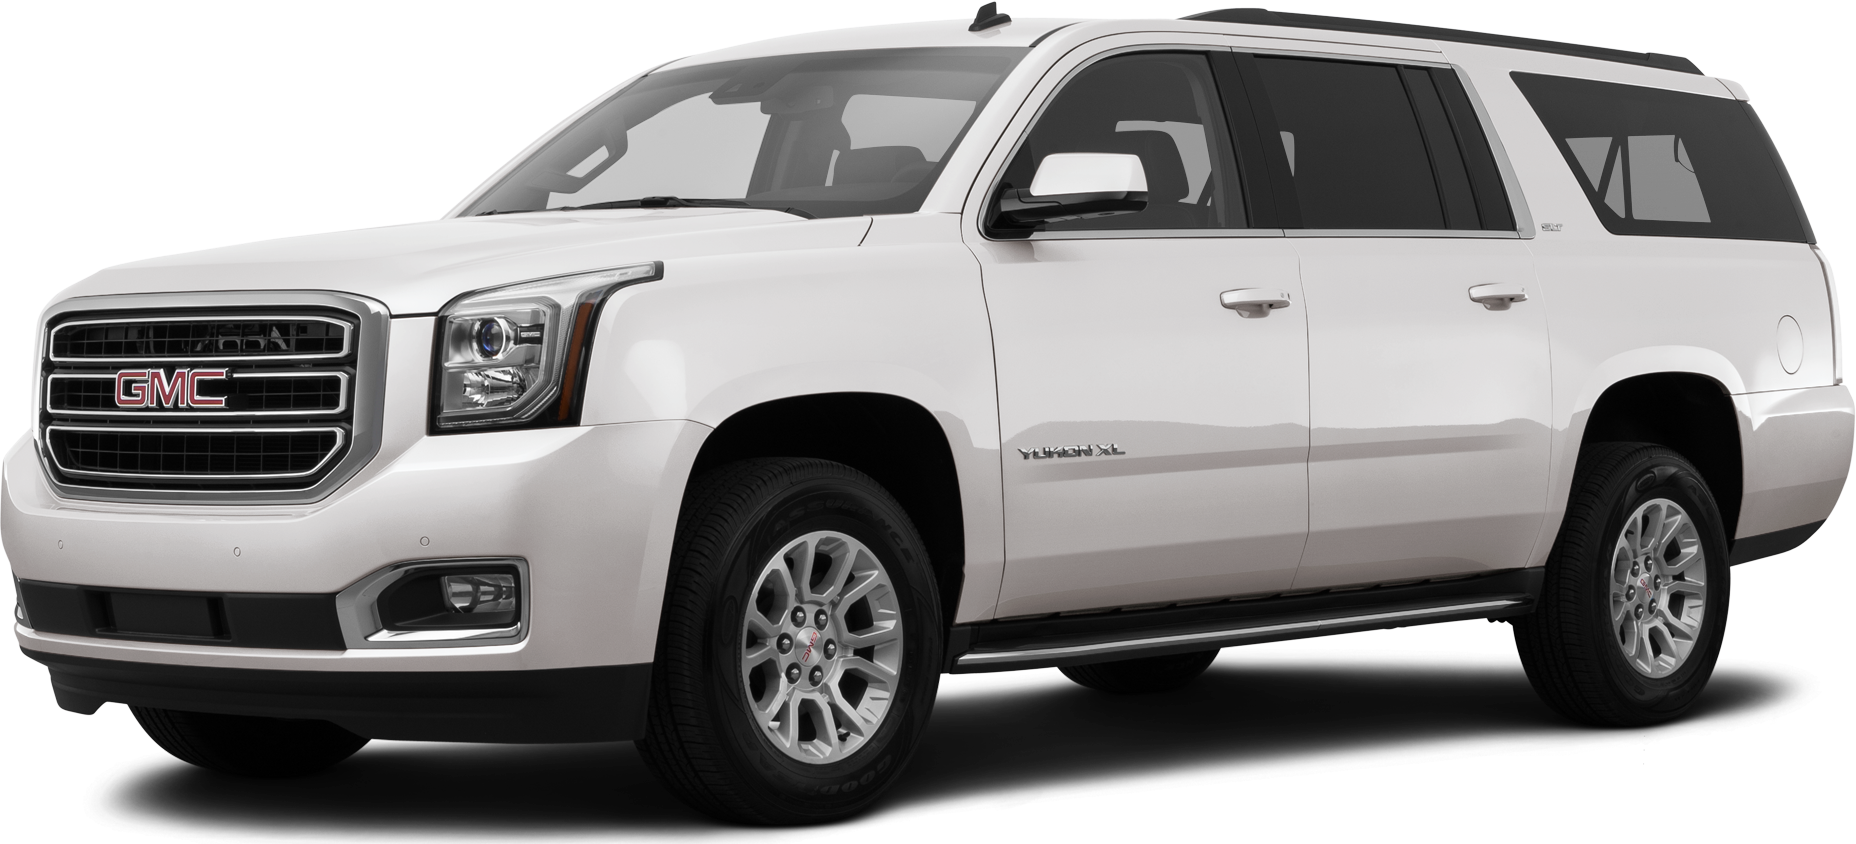 2015 Gmc Yukon Xl Price Value Ratings And Reviews Kelley Blue Book 7238